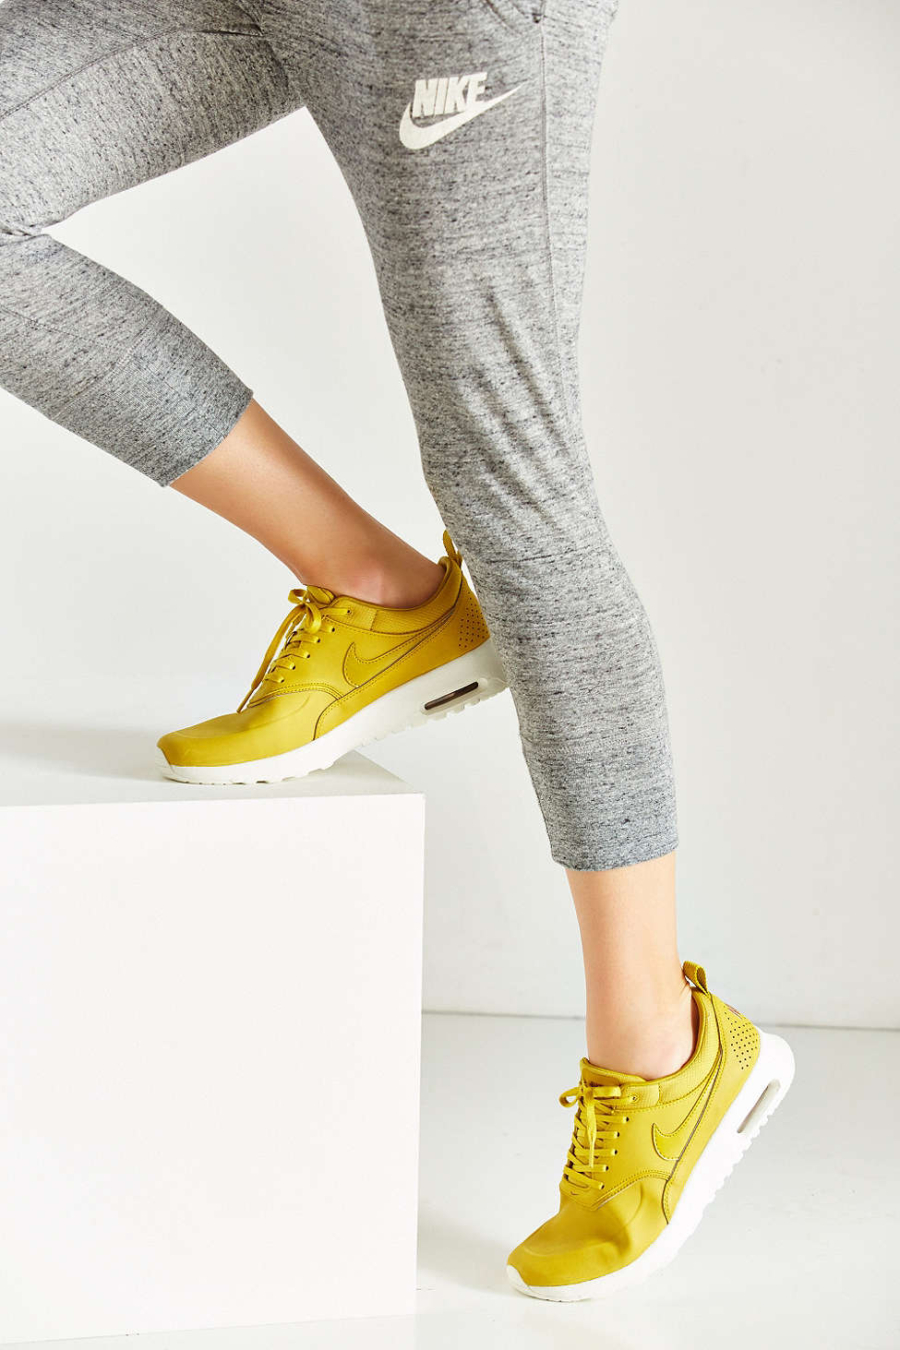 Work Out Sneakers - 7 Activewear Pieces That Can Change Your Attitude About Hitting The Gym // Notjessfashion.com